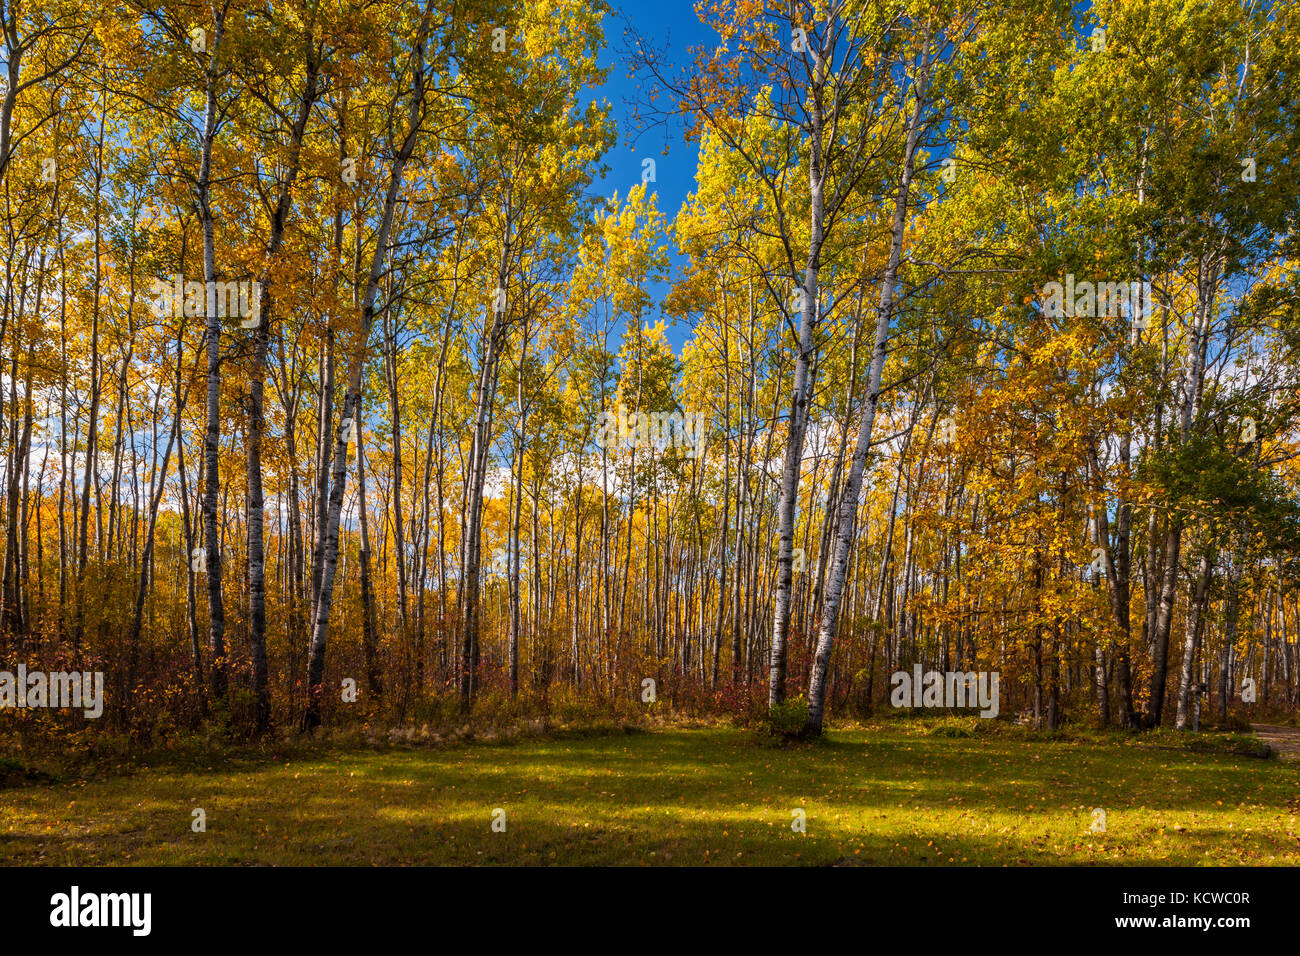 Aspen (Populus tremuloides) forest in autumn colors, Ste. Anne, Manitoba, Canada Stock Photo